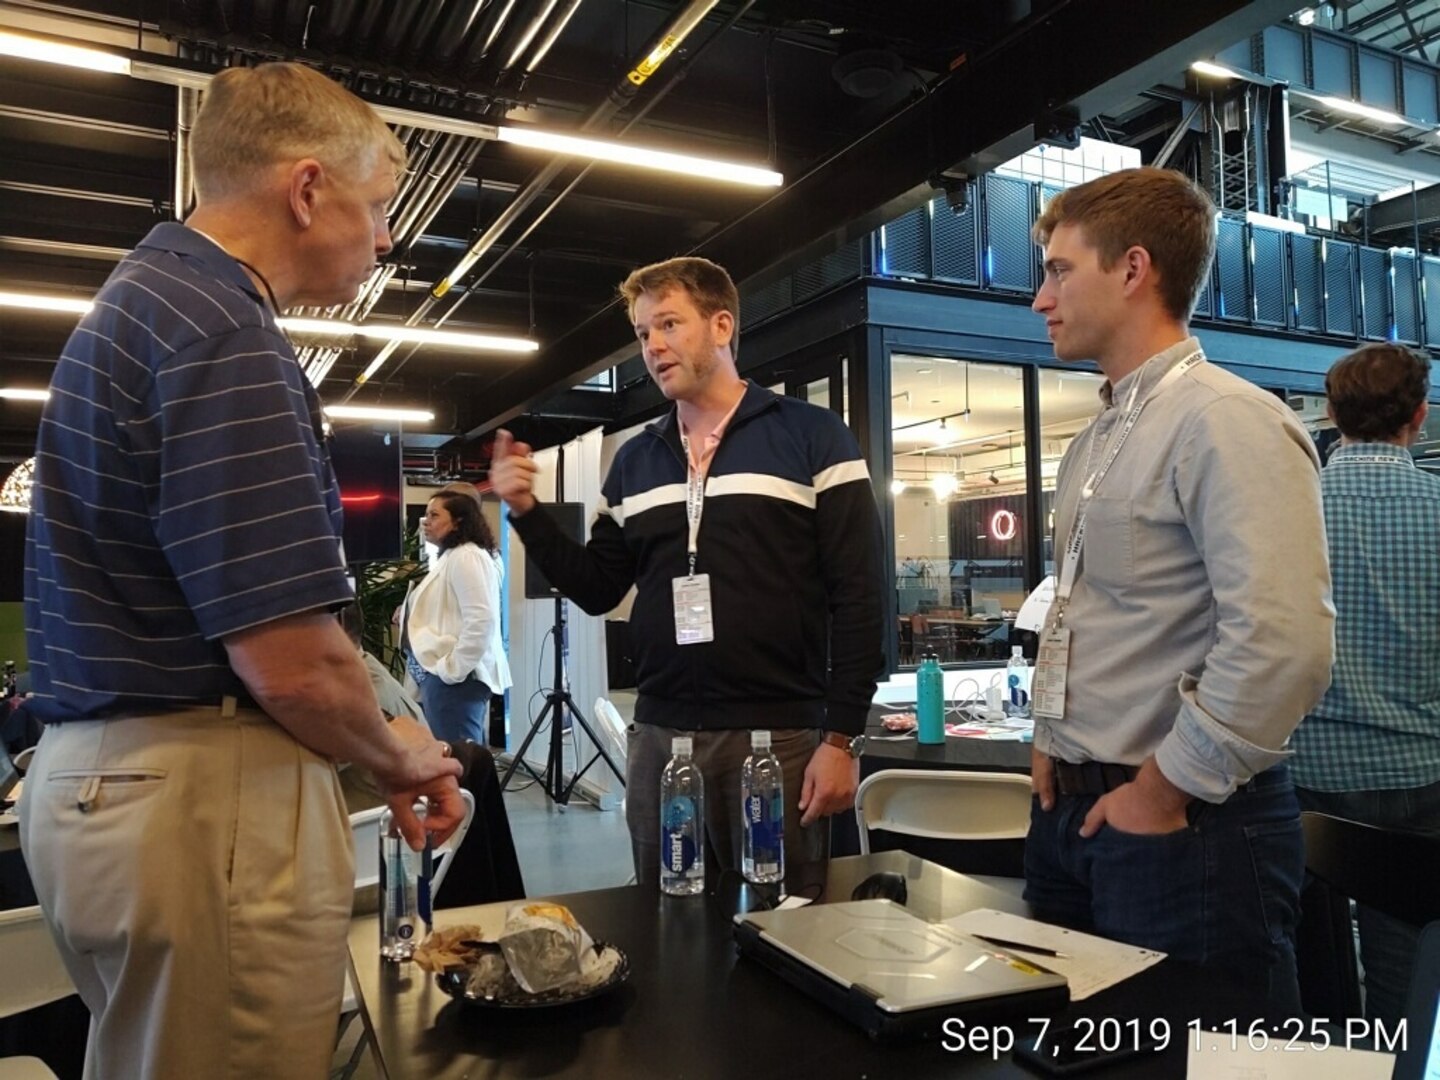 Bryan Kessel (right) and Nathan Desloover (center), both engineers at Naval Surface Warfare Center, Carderock Division, speak with Rear Adm. Lorin Selby, chief engineer and deputy commander for Ship Design, Integration and naval Engineering at NAVSEA, during the Hack the Machine 2019 in New York City on Sept. 7, 2019. (U.S. Navy photo by Garry Shields/Released)